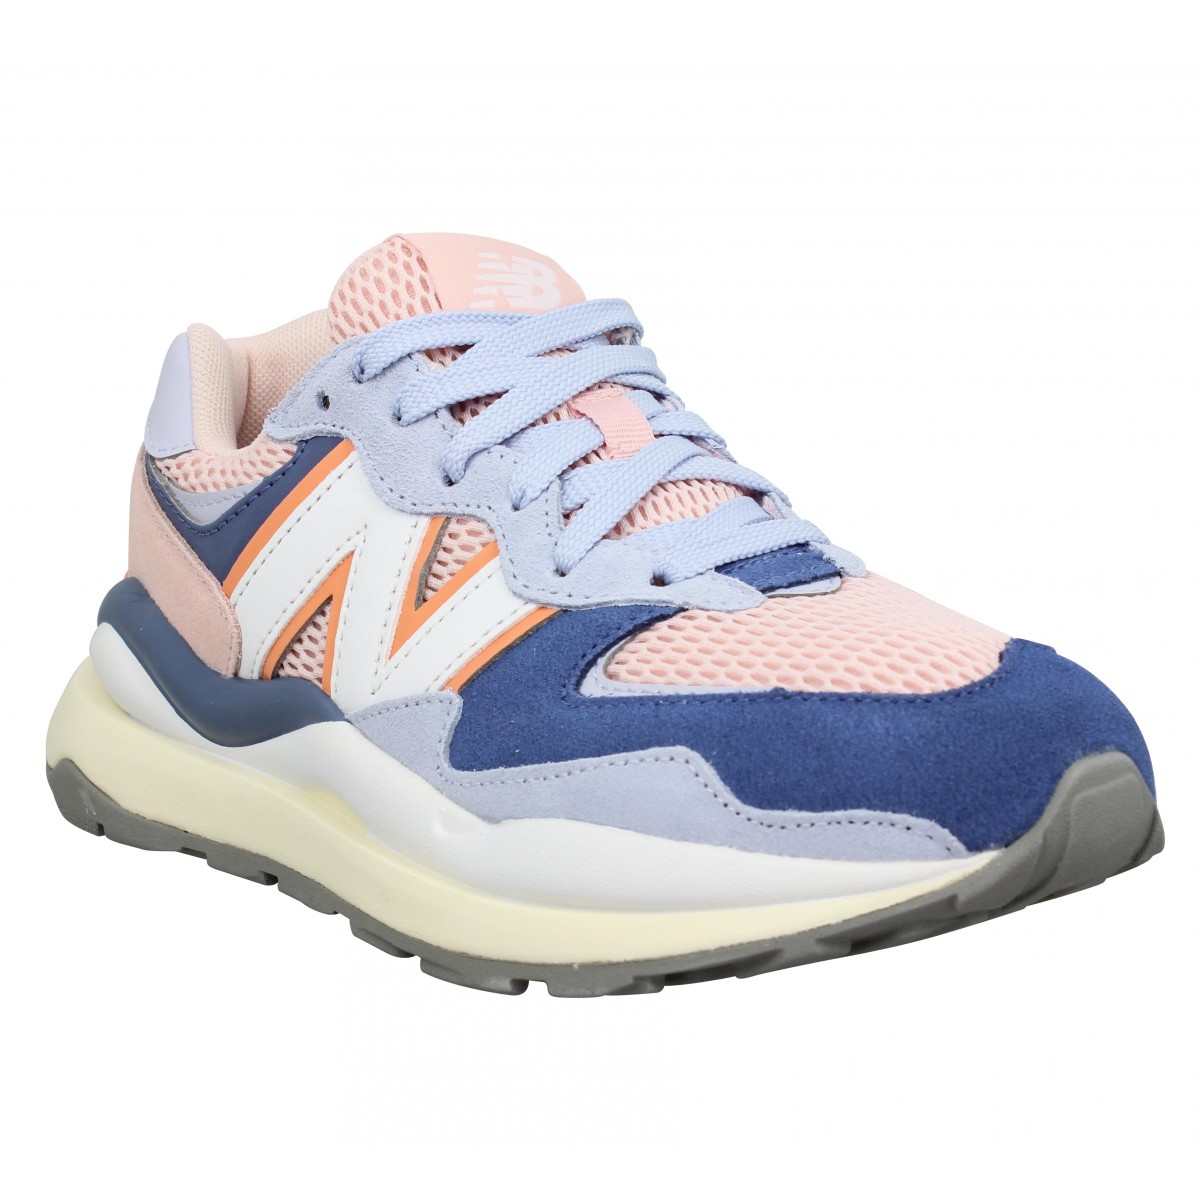 New balance 5740 velours toile pink night femme | Fanny chaussures